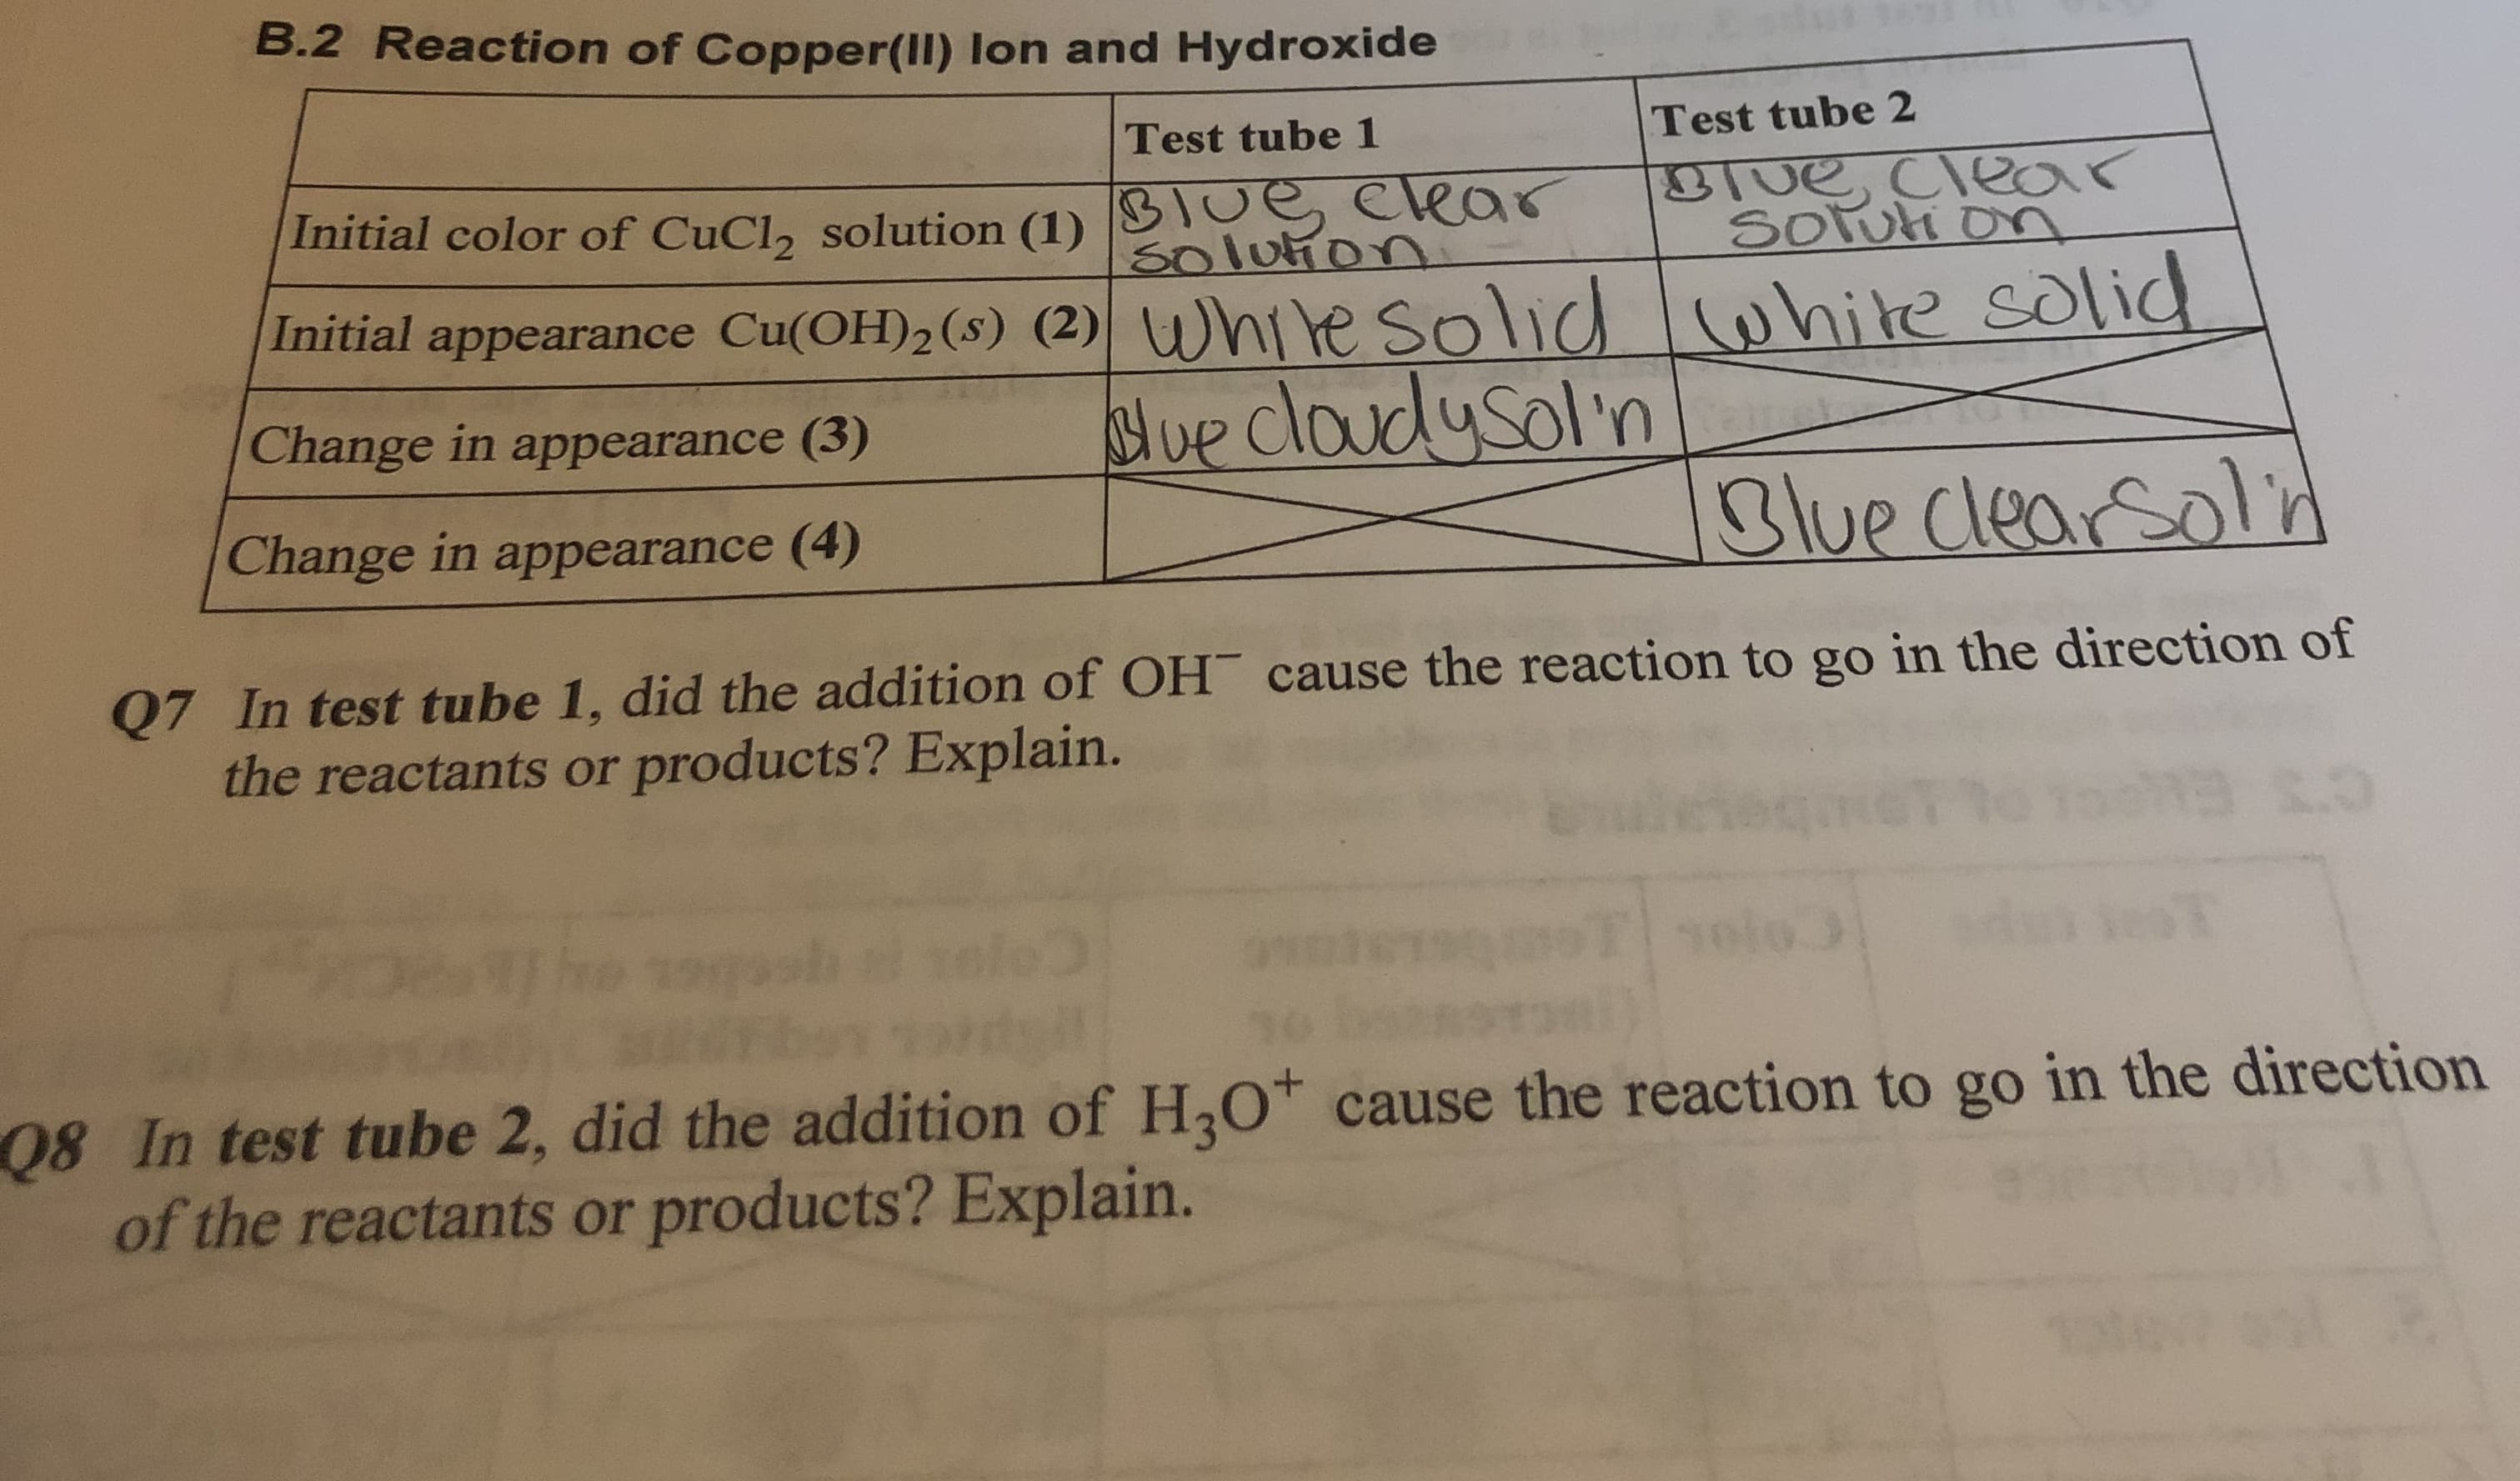 Q7 In test tube 1, did the addition of OH cause the reaction to go in the direction of
the reactants or products? Explain.
8 In test tube 2, did the addition of HOt cause the reaction to go in the direction
of the reactants or products? Explain.
